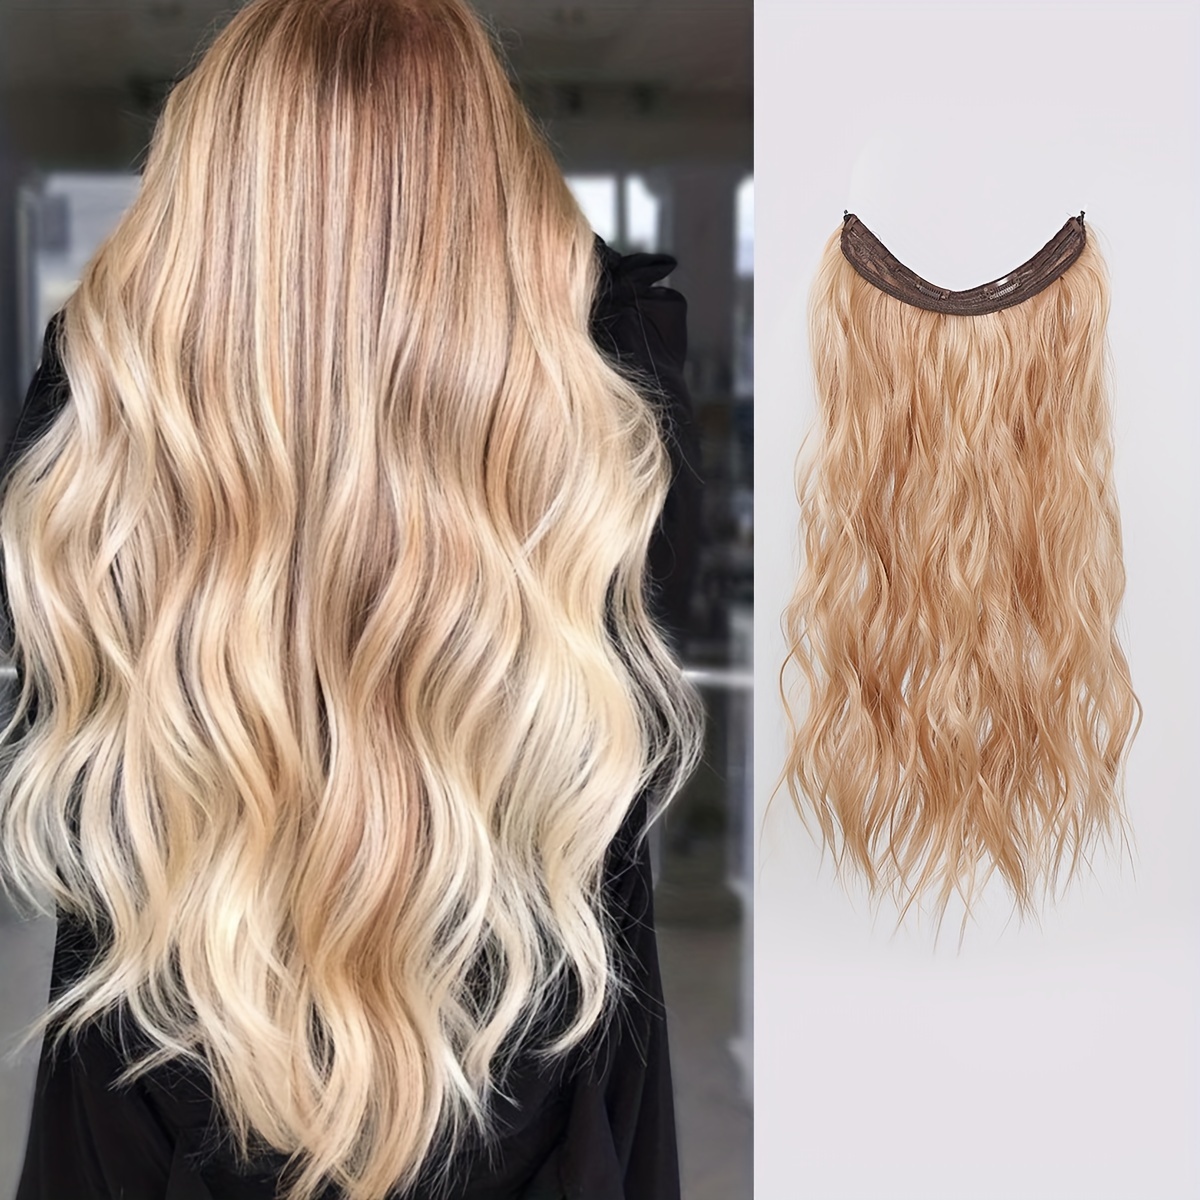 Long Wavy Invisible Wire Hair Extensions Synthetic Hairpiece With Transparent Wire Adjustable Size, Light Ash Brown With Blonde Highlights Hair